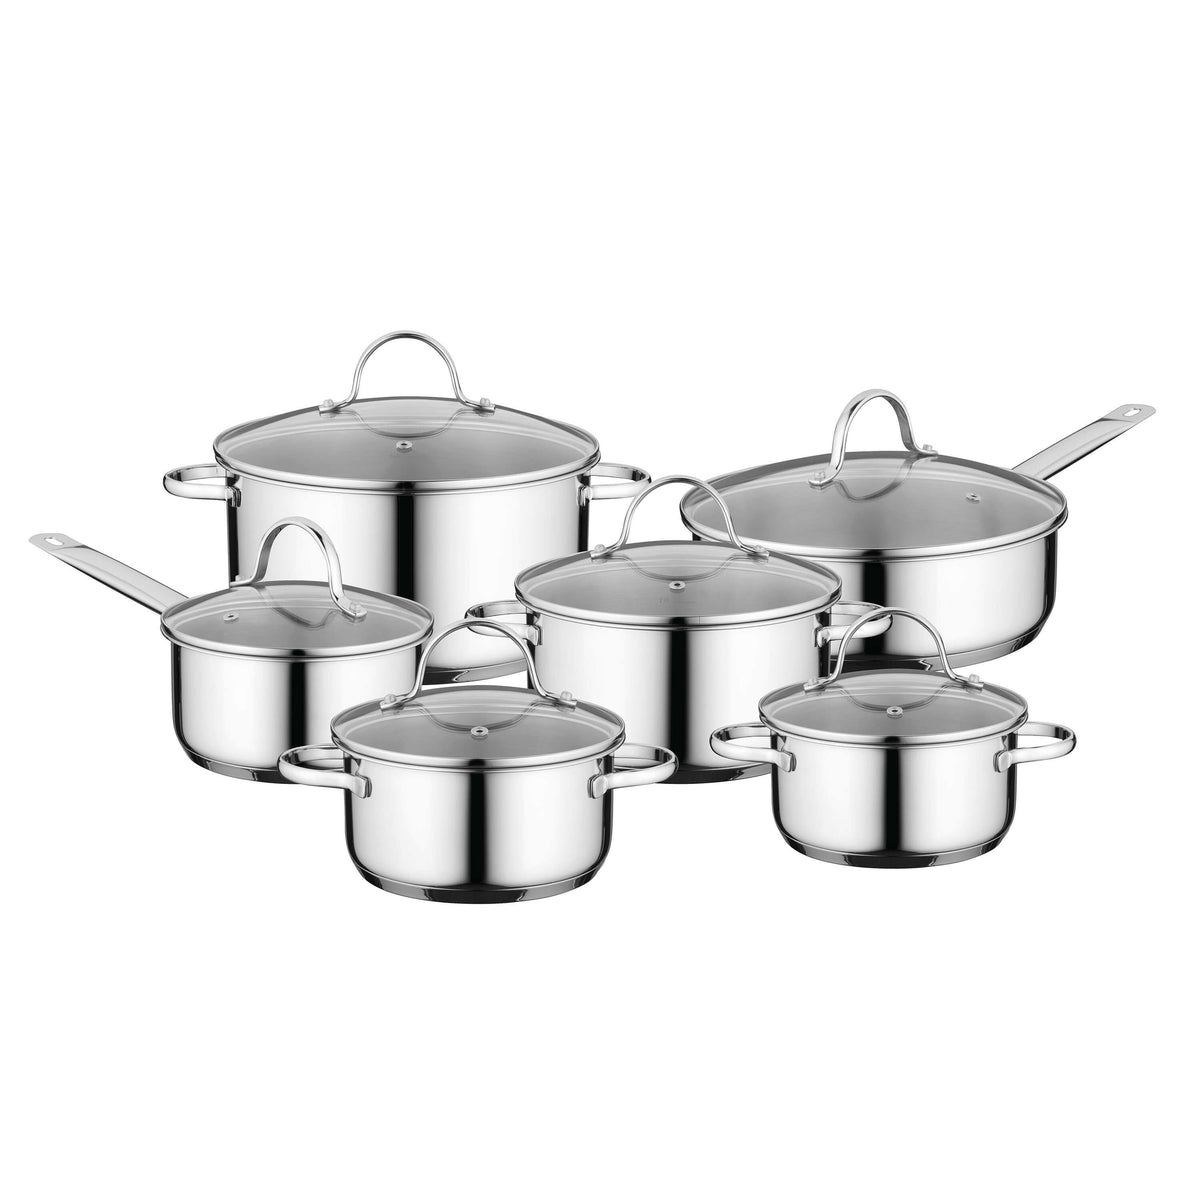 BergHOFF TFK 4pc 18/10 Stainless Steel Cookware Completer Set 